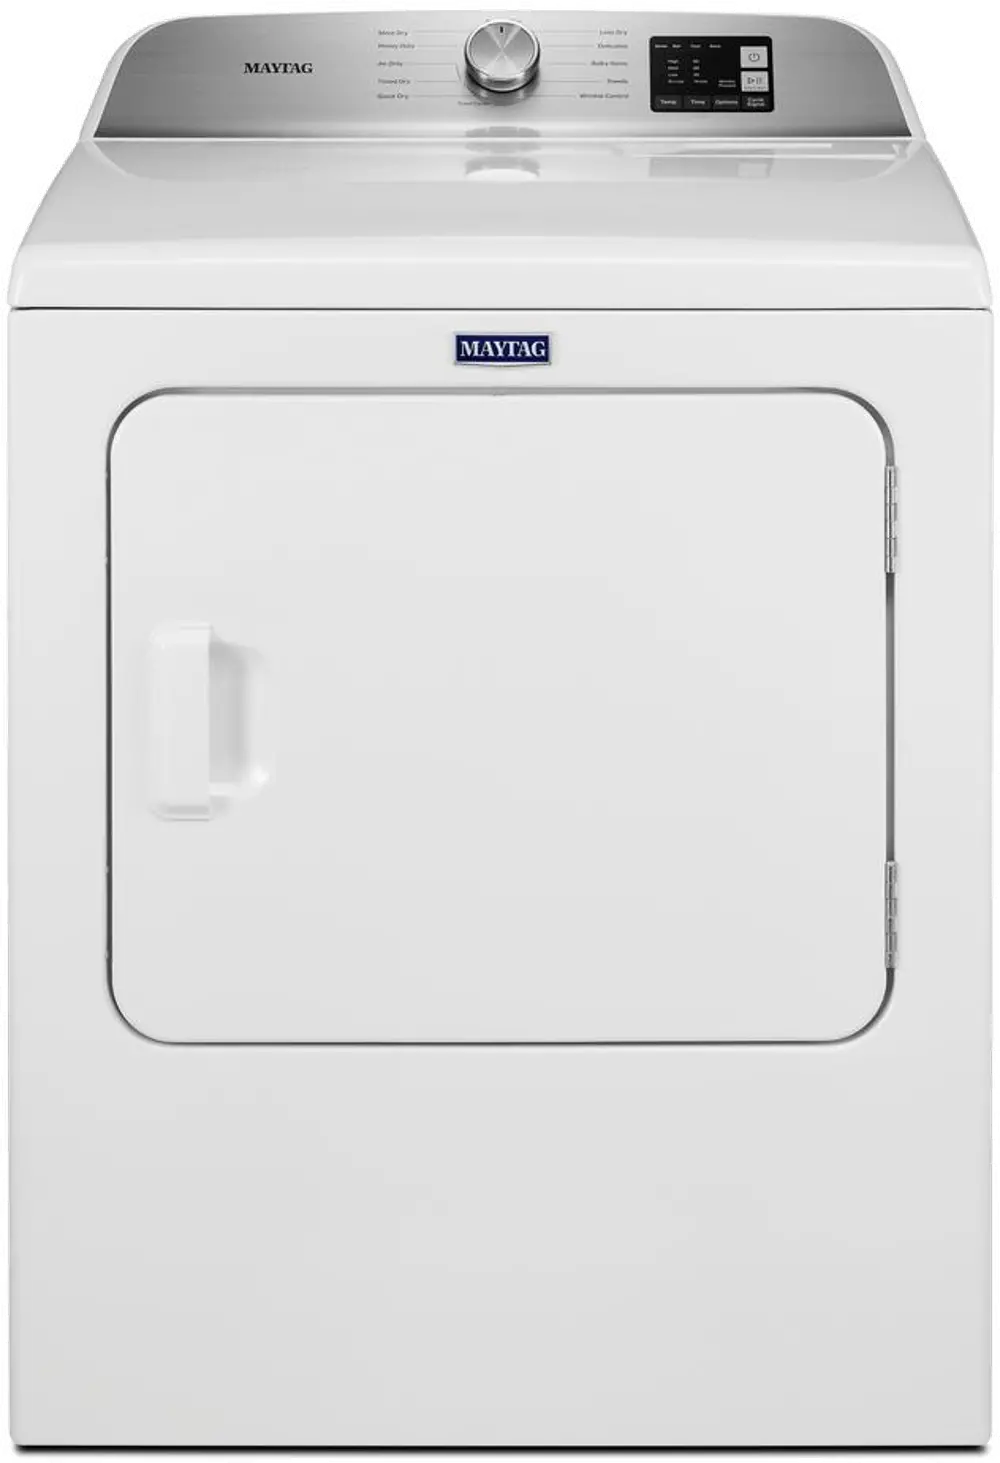 MGD6200KW Maytag 7.0 Cu Ft Gas Dryer with Moisture Sensing - White-1